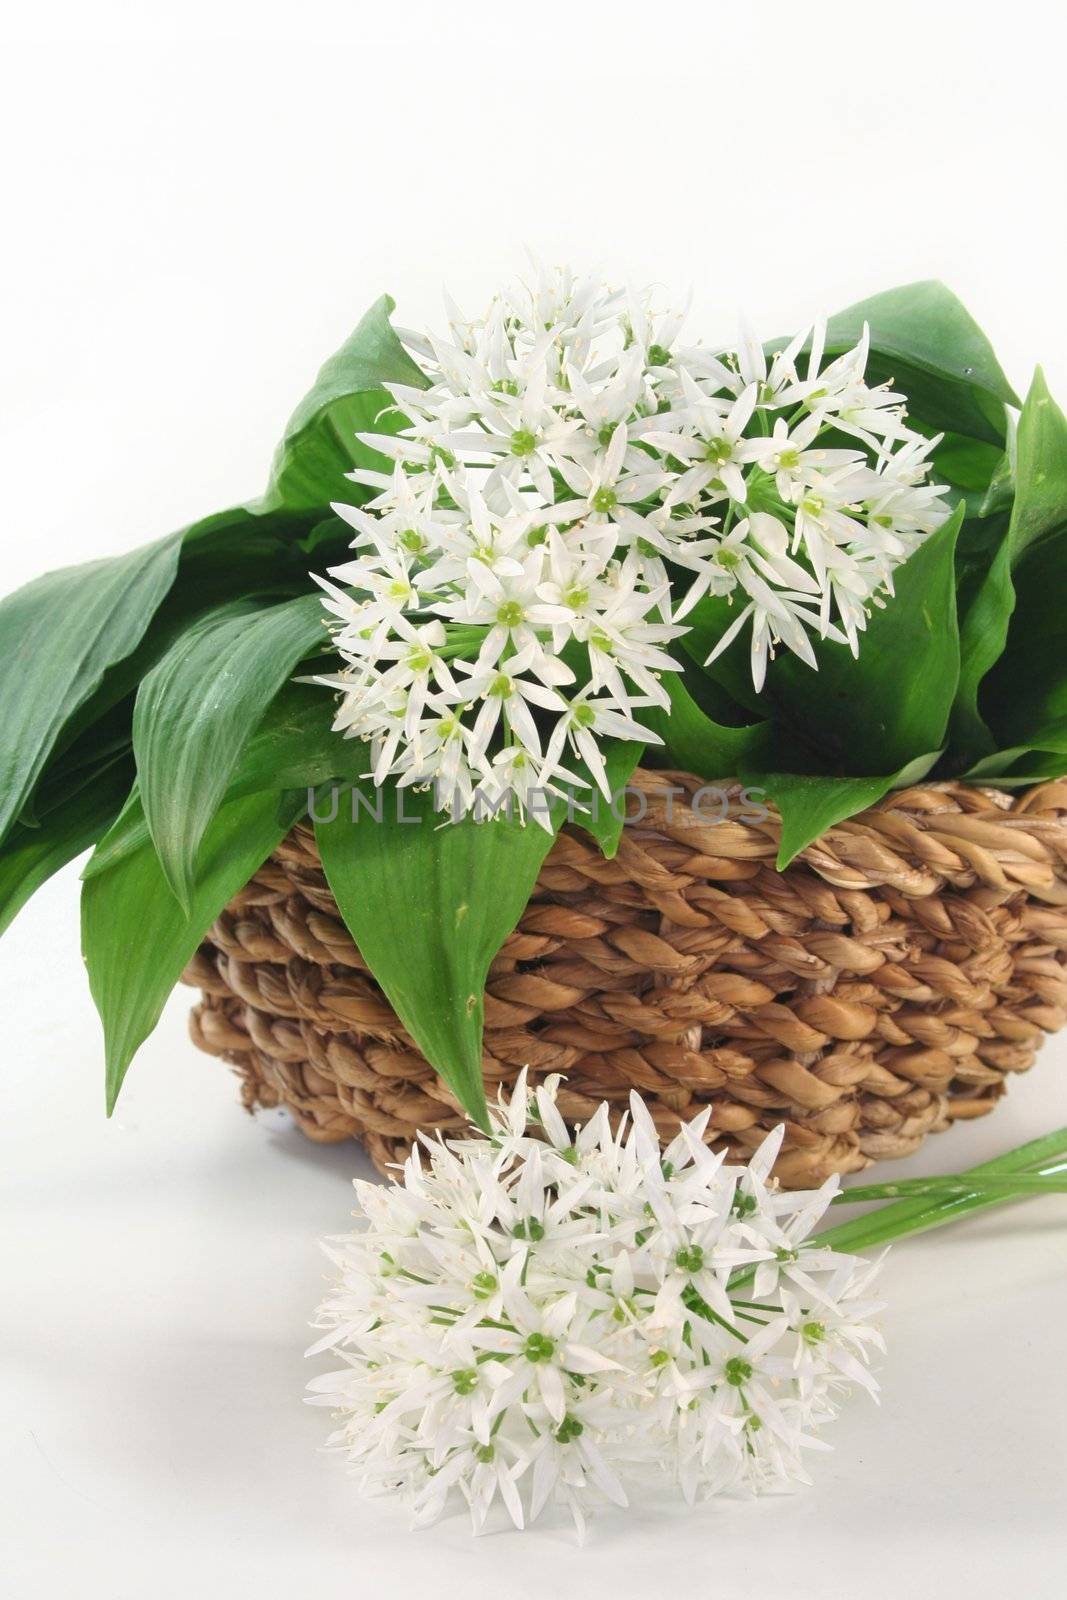 fresh wild garlic leaves with flowers in a basket